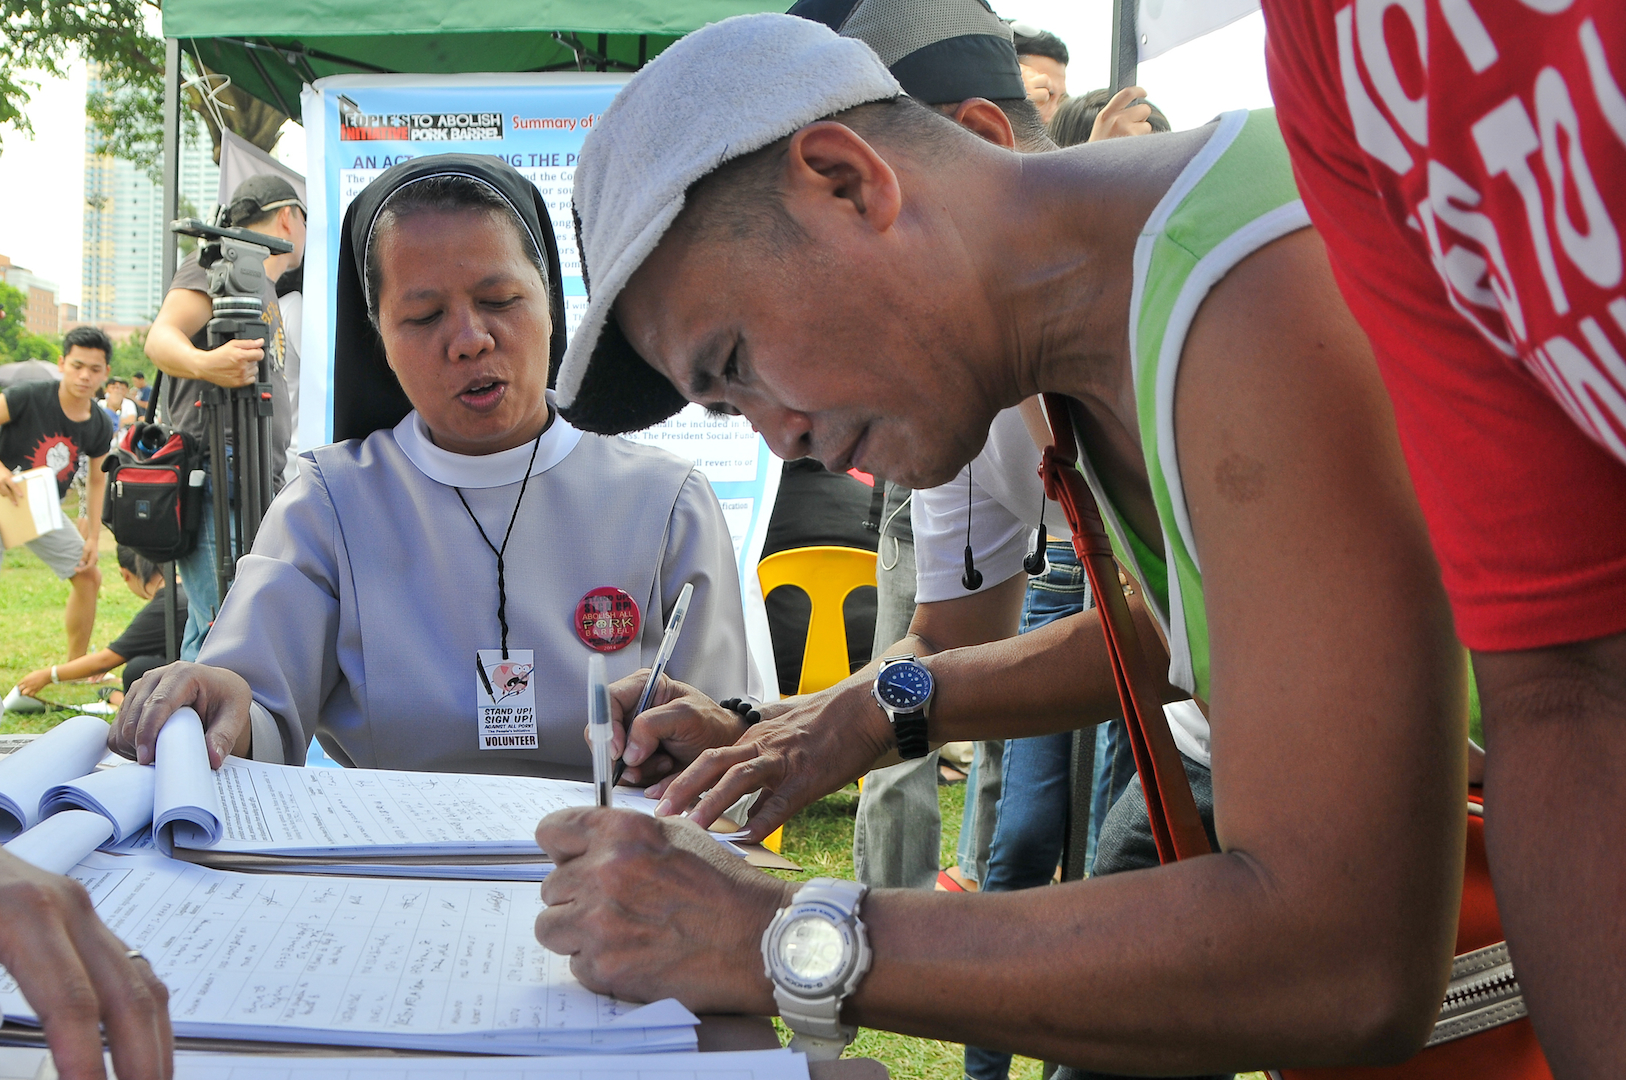 A Catholic nun helps voters sign up for the people's initiative to draft a law scrapping all lump sum discretionary funds Monday at Luneta Park, Manila, Philippines. (Roy Lagarde)